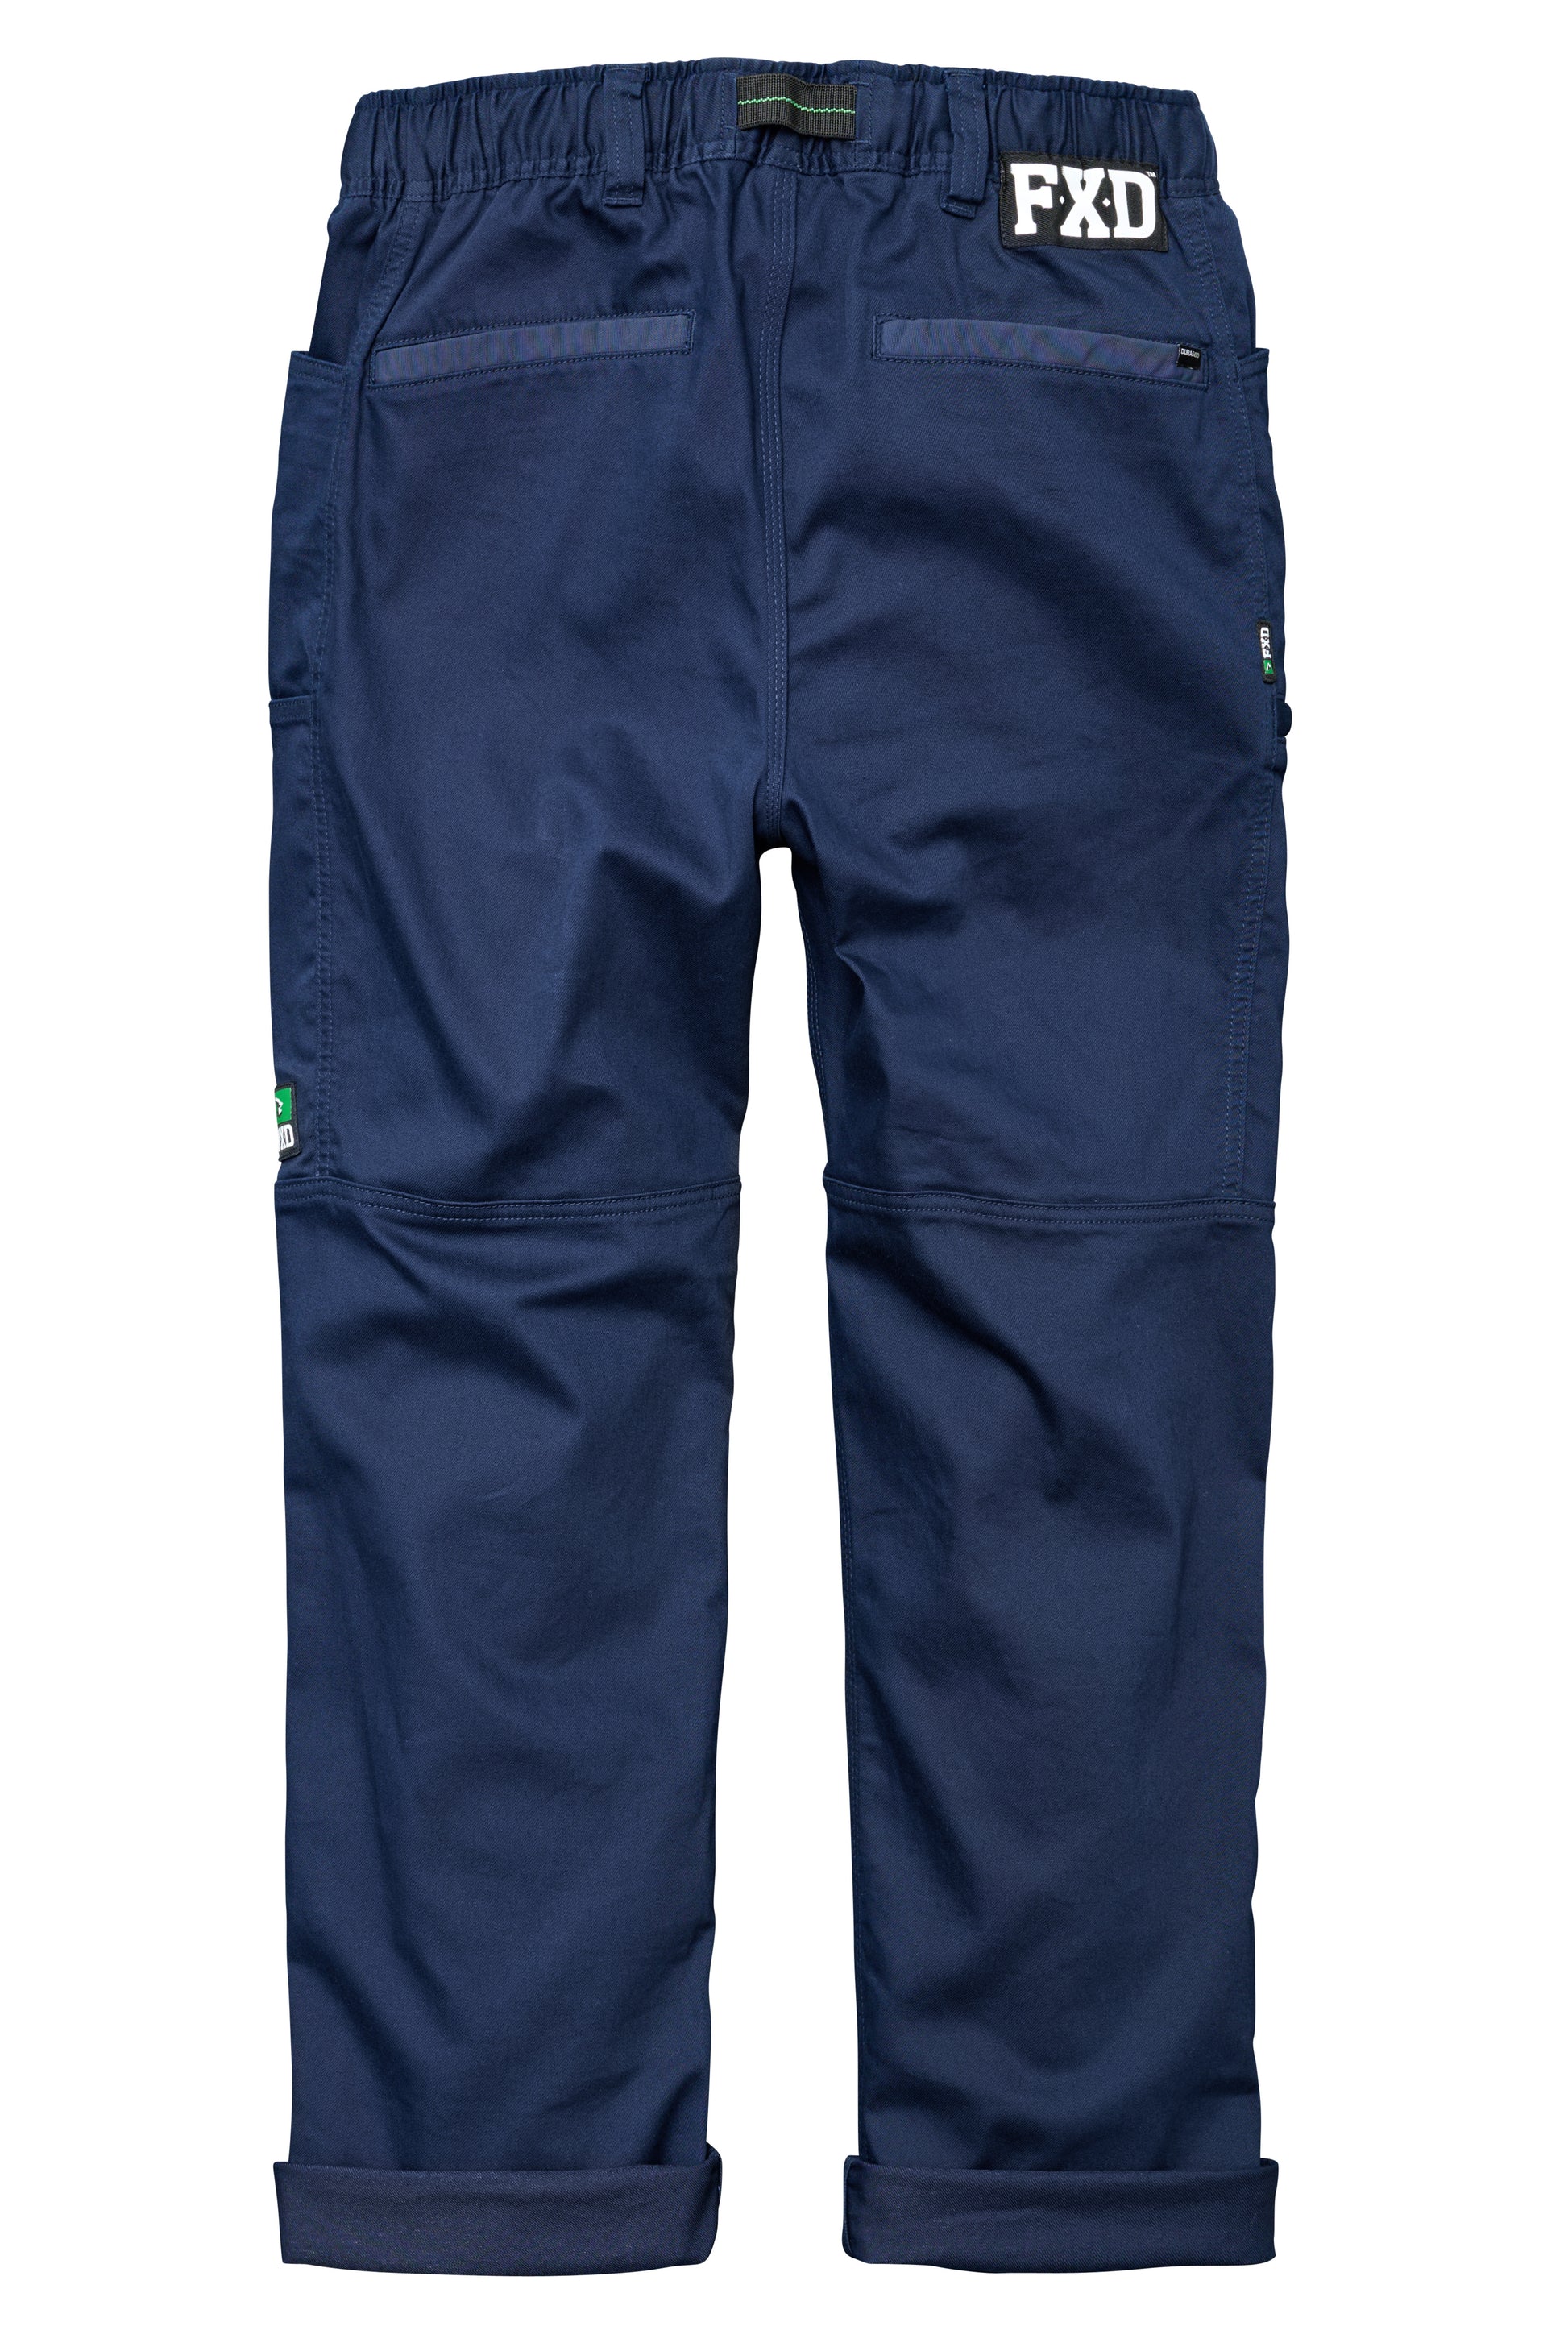 FXD WP4 Stretch Work Pants With Cuff